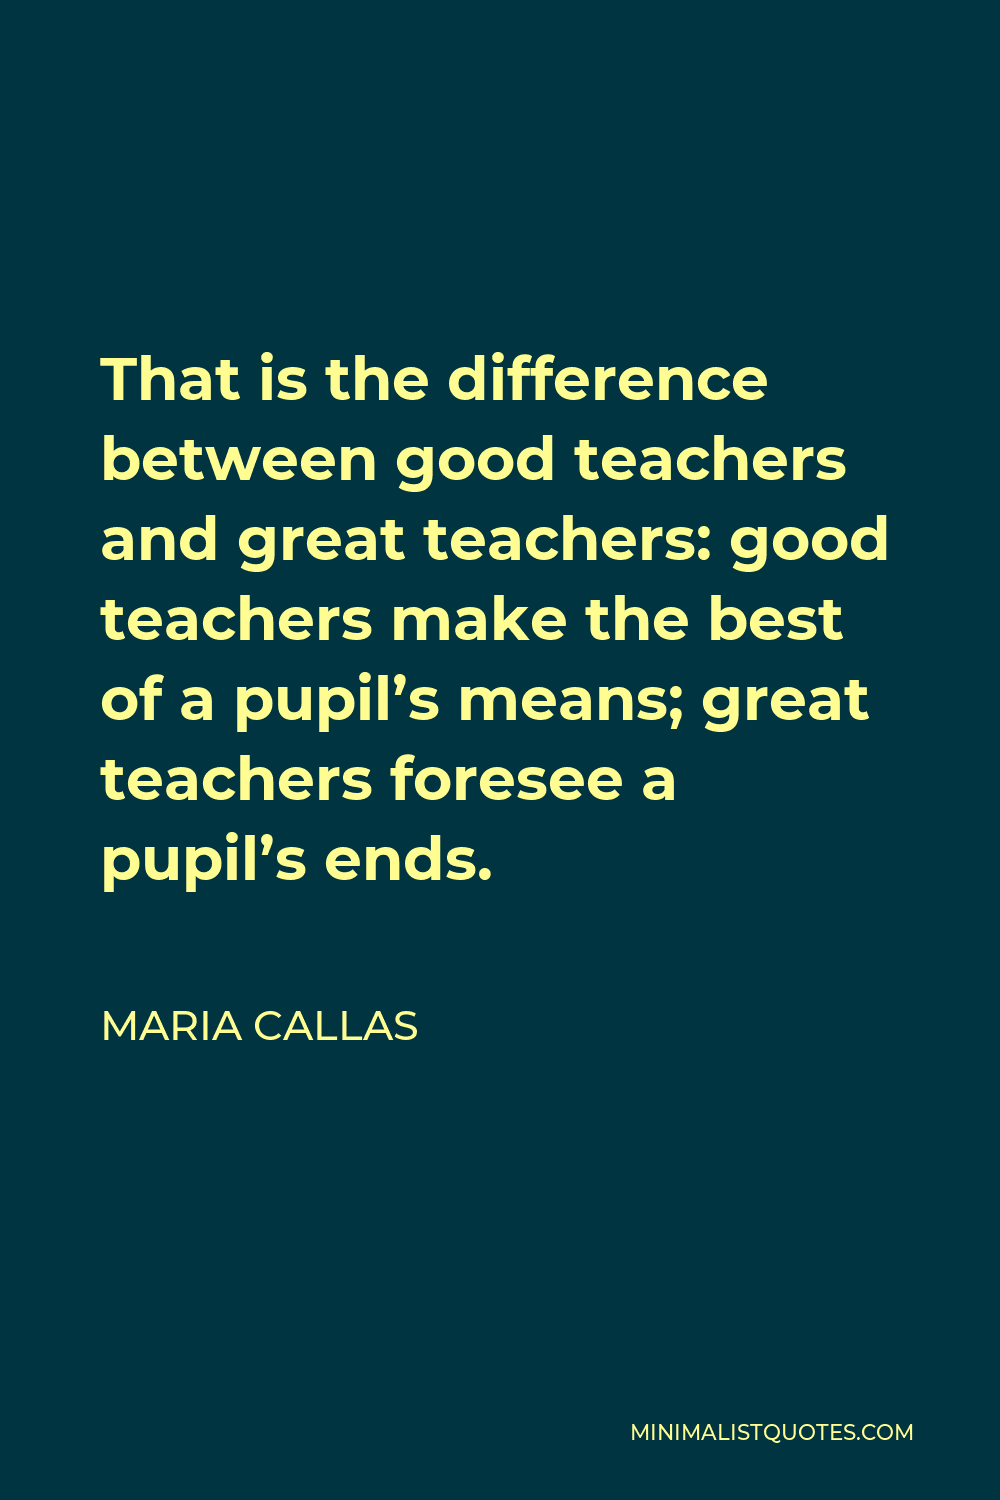 Maria Callas Quote - That is the difference between good teachers and great teachers: good teachers make the best of a pupil’s means; great teachers foresee a pupil’s ends.